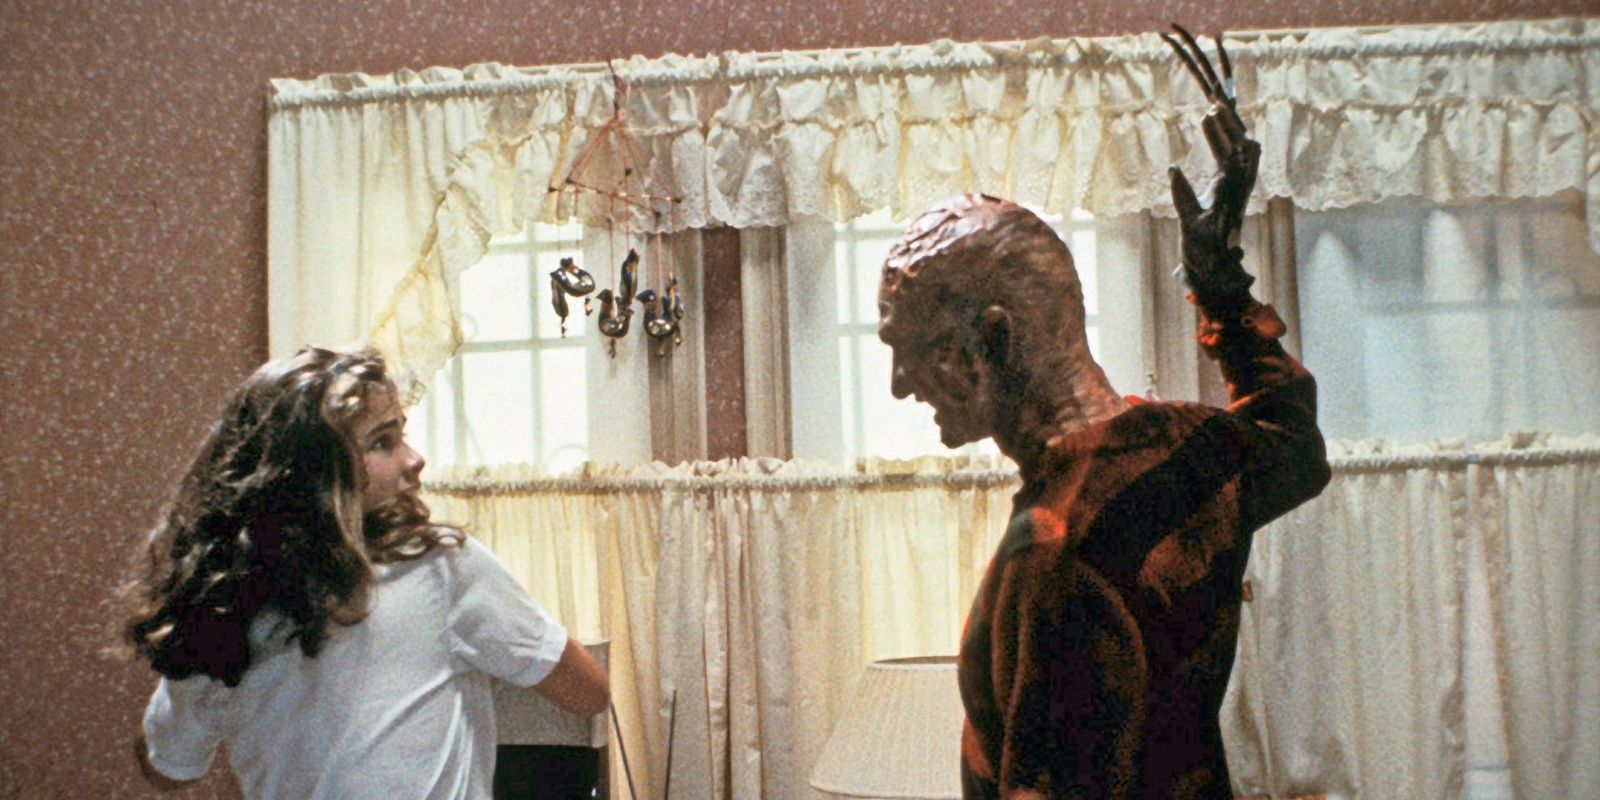 Freddy-attacks-his-victim-in-A-Nightmare-on-Elm-Street-Cropped-1-1